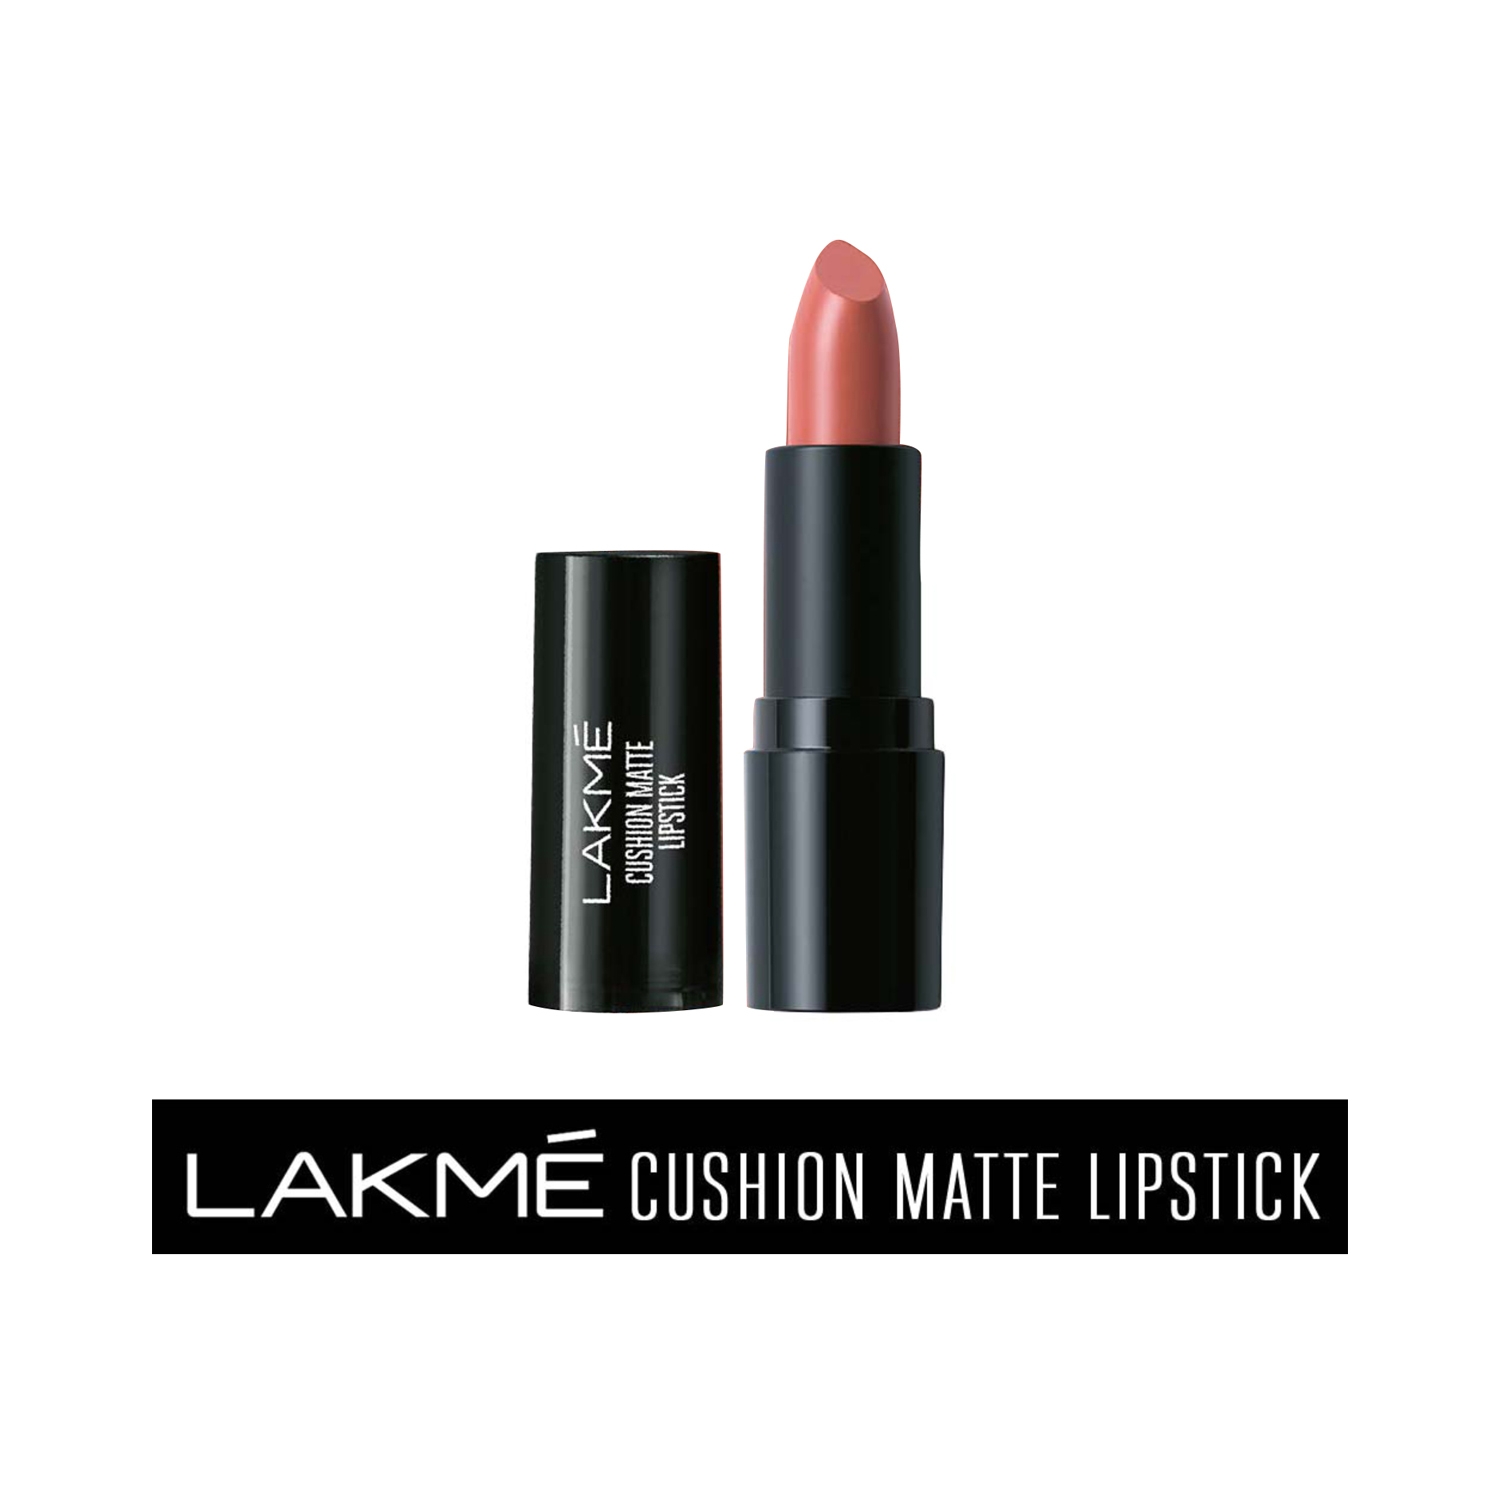 Lakme | Lakme Forever Matte Lipstick Made With French Rose Oil Extracts Pink Blush (4.5 g)